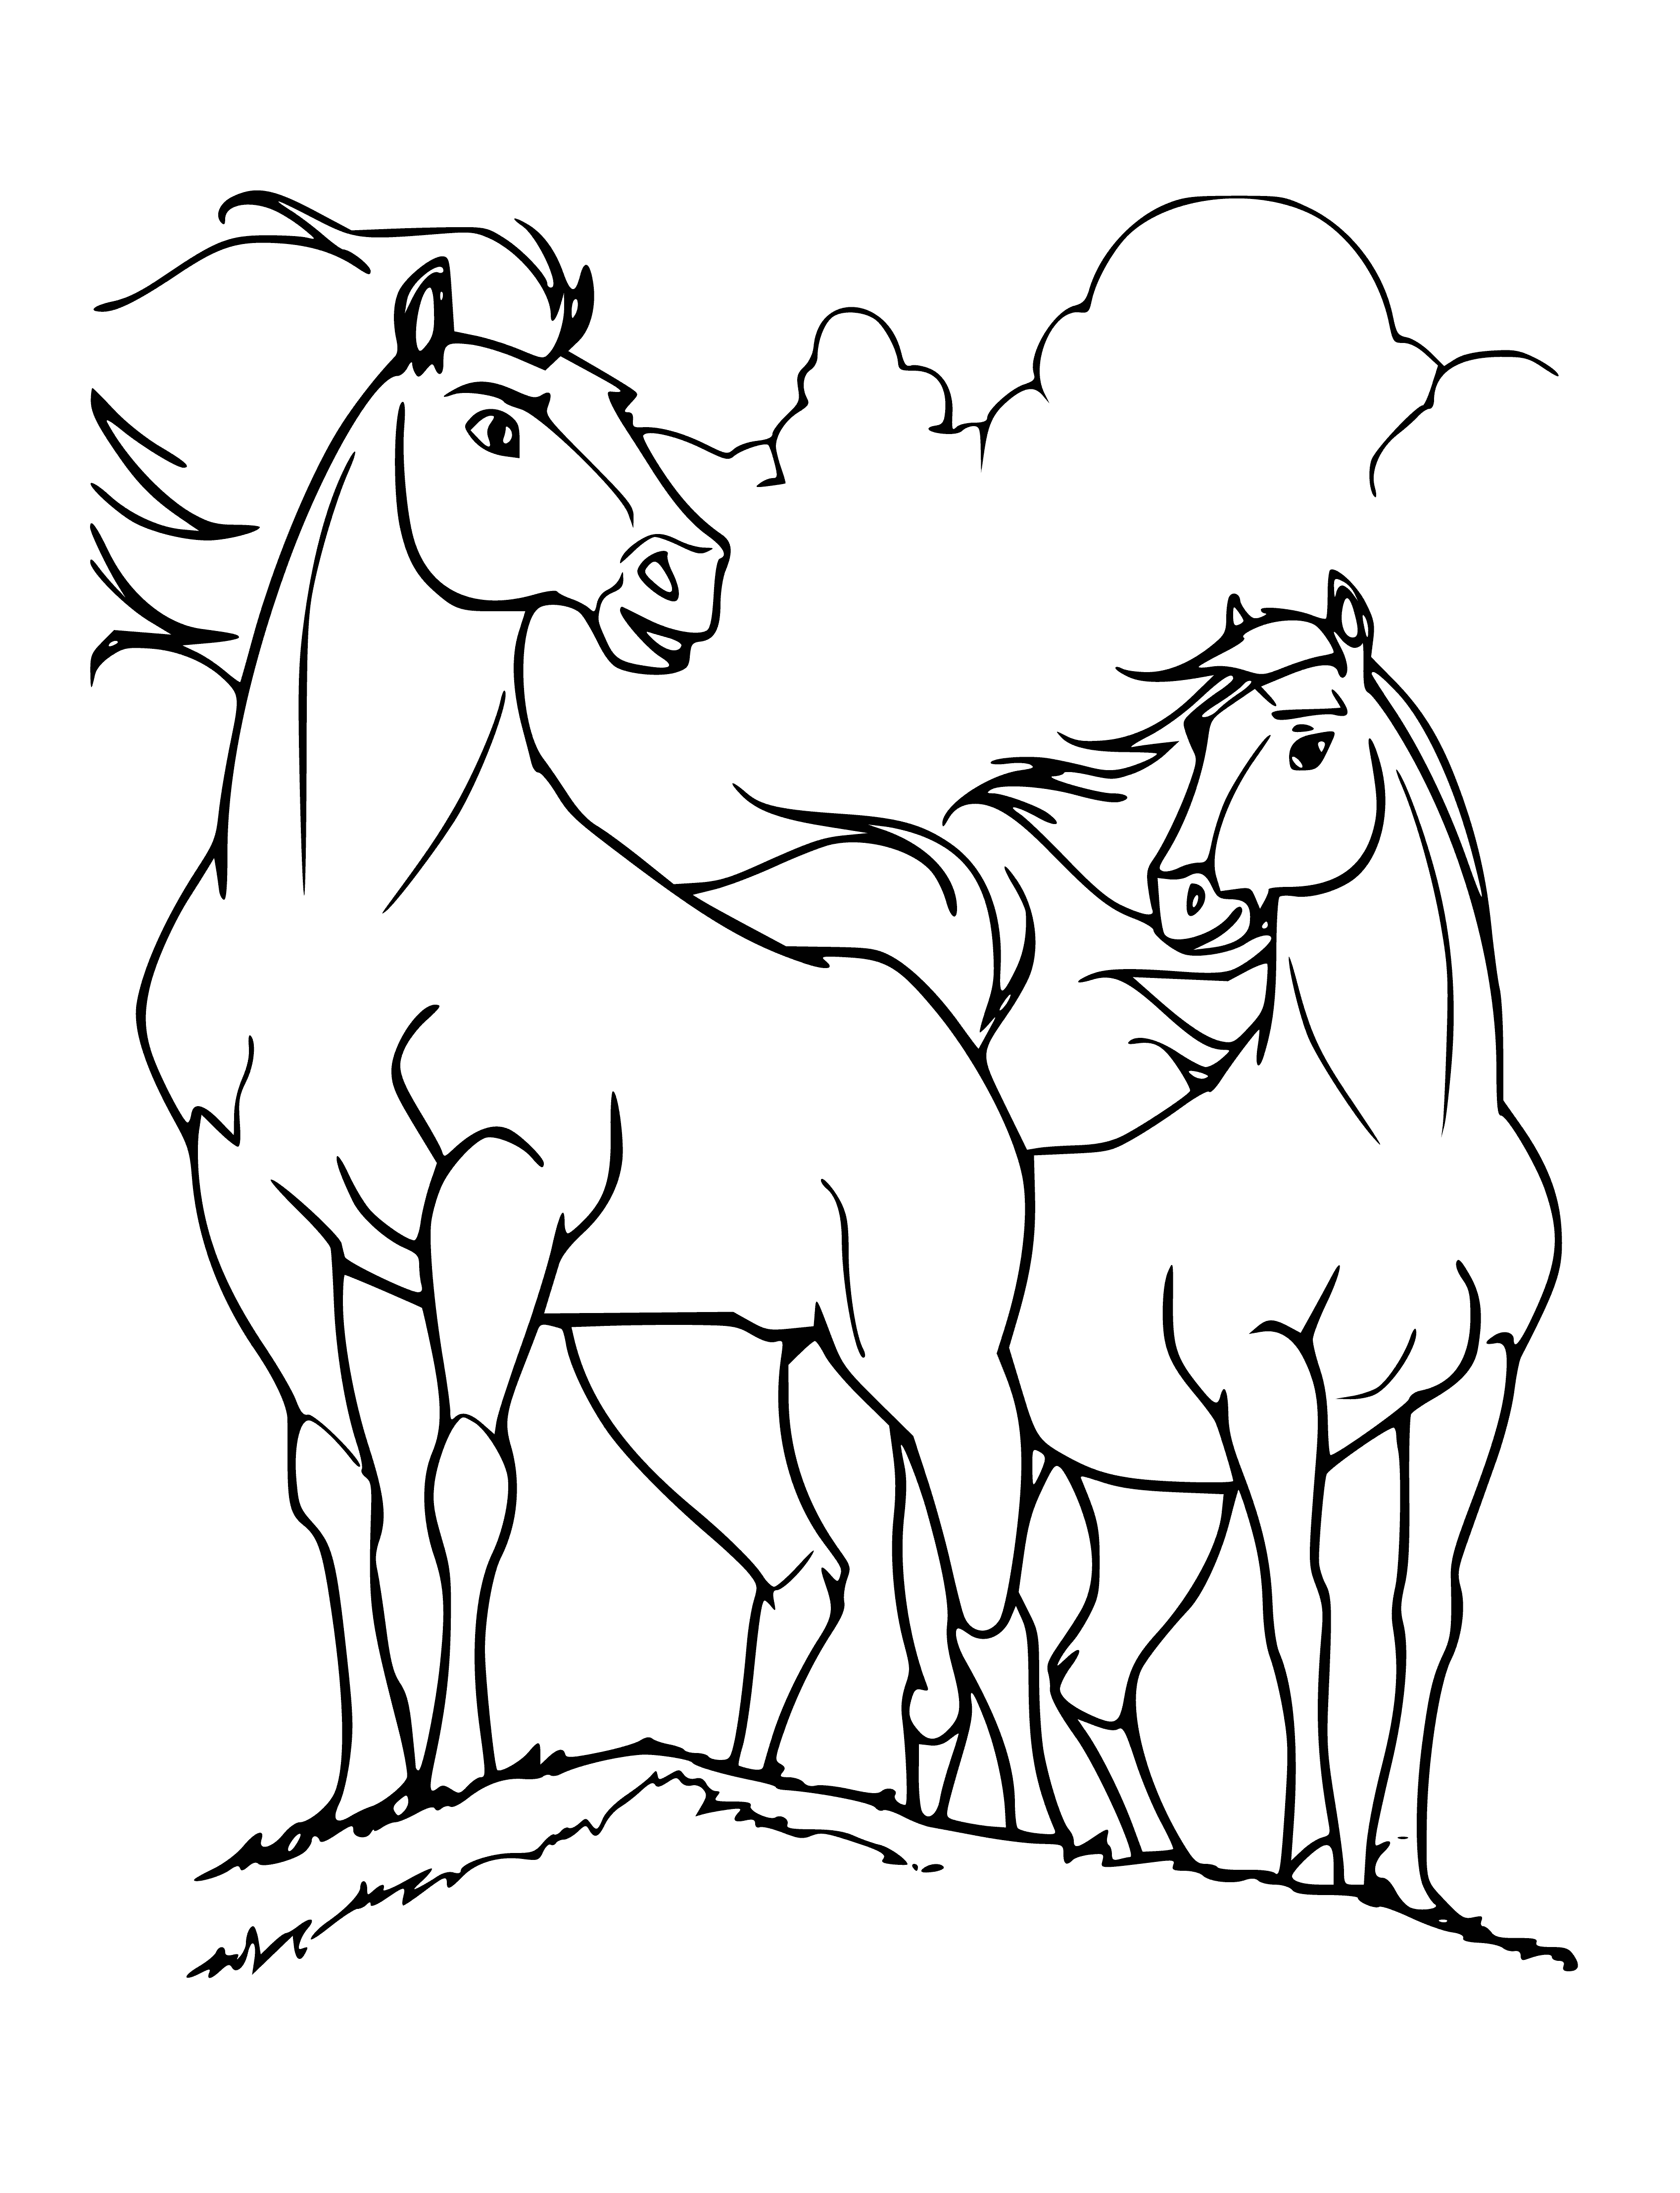 Horse Spirit coloring page